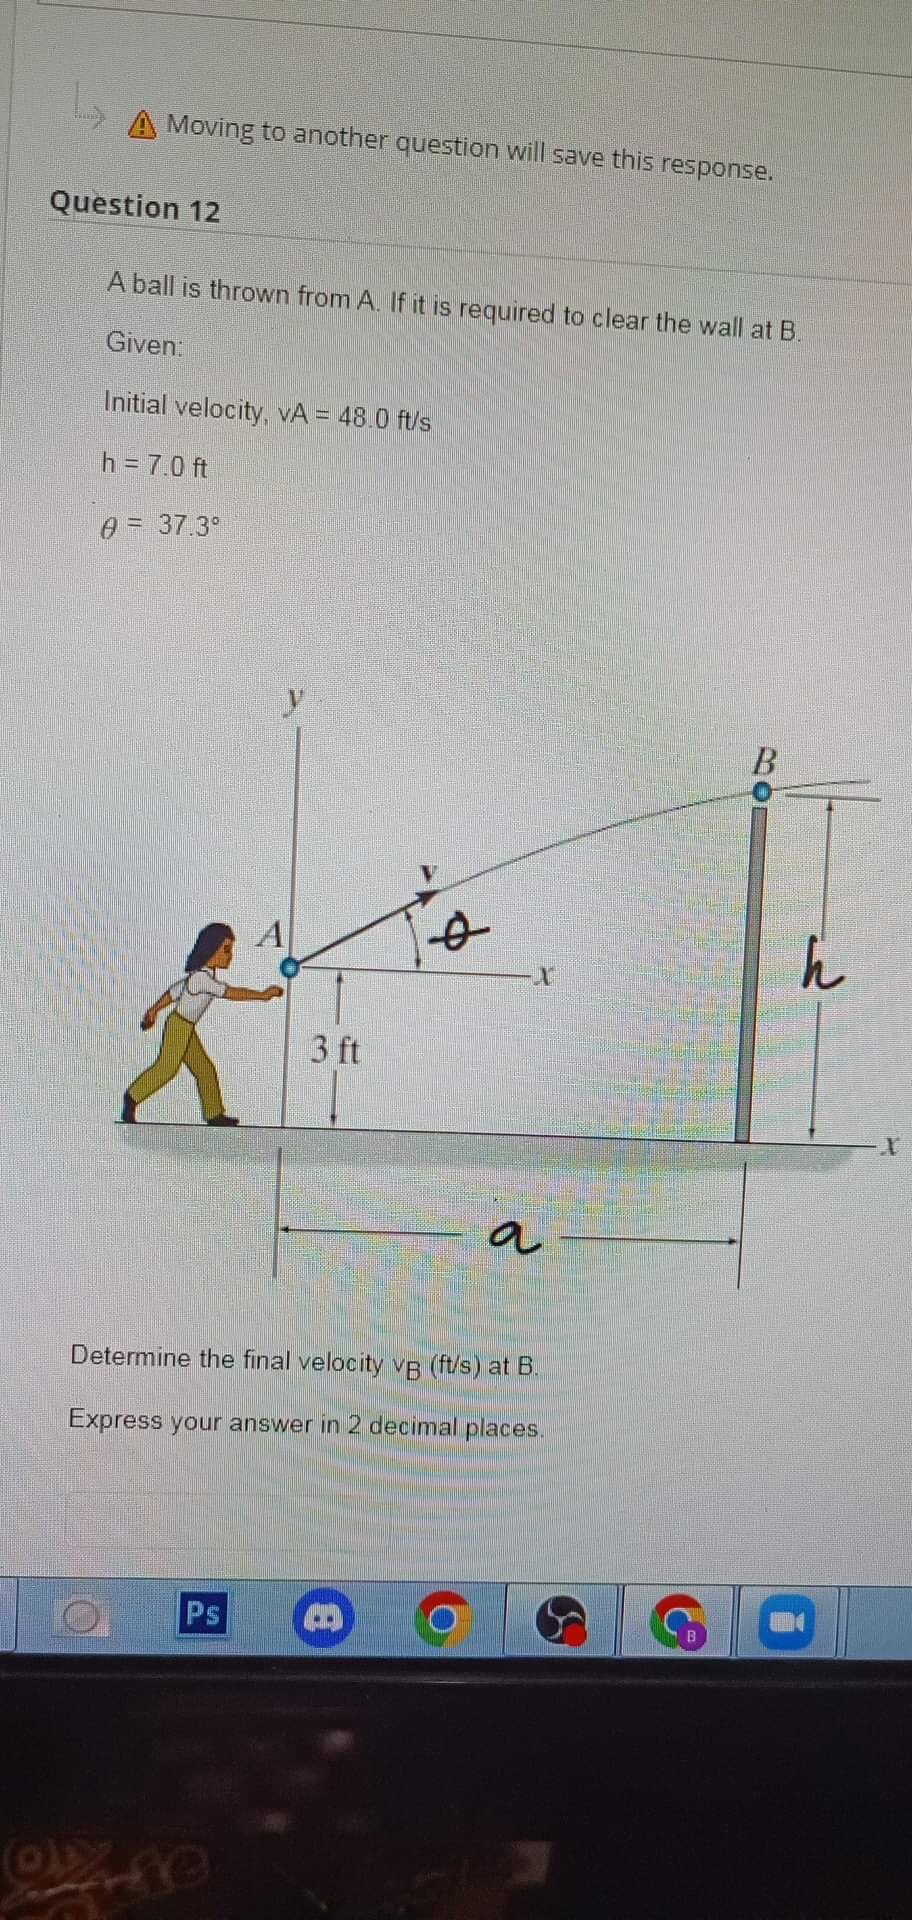 A Moving to another question will save this response.
Question 12
OD
A ball is thrown from A. If it is required to clear the wall at B.
Given:
Initial velocity, VA = 48.0 ft/s
h = 7.0 ft
0 = 37.3°
3 ft
Ps
Ø
Determine the final velocity vB (ft/s) at B.
Express your answer in 2 decimal places.
B
X
a
B
h
X